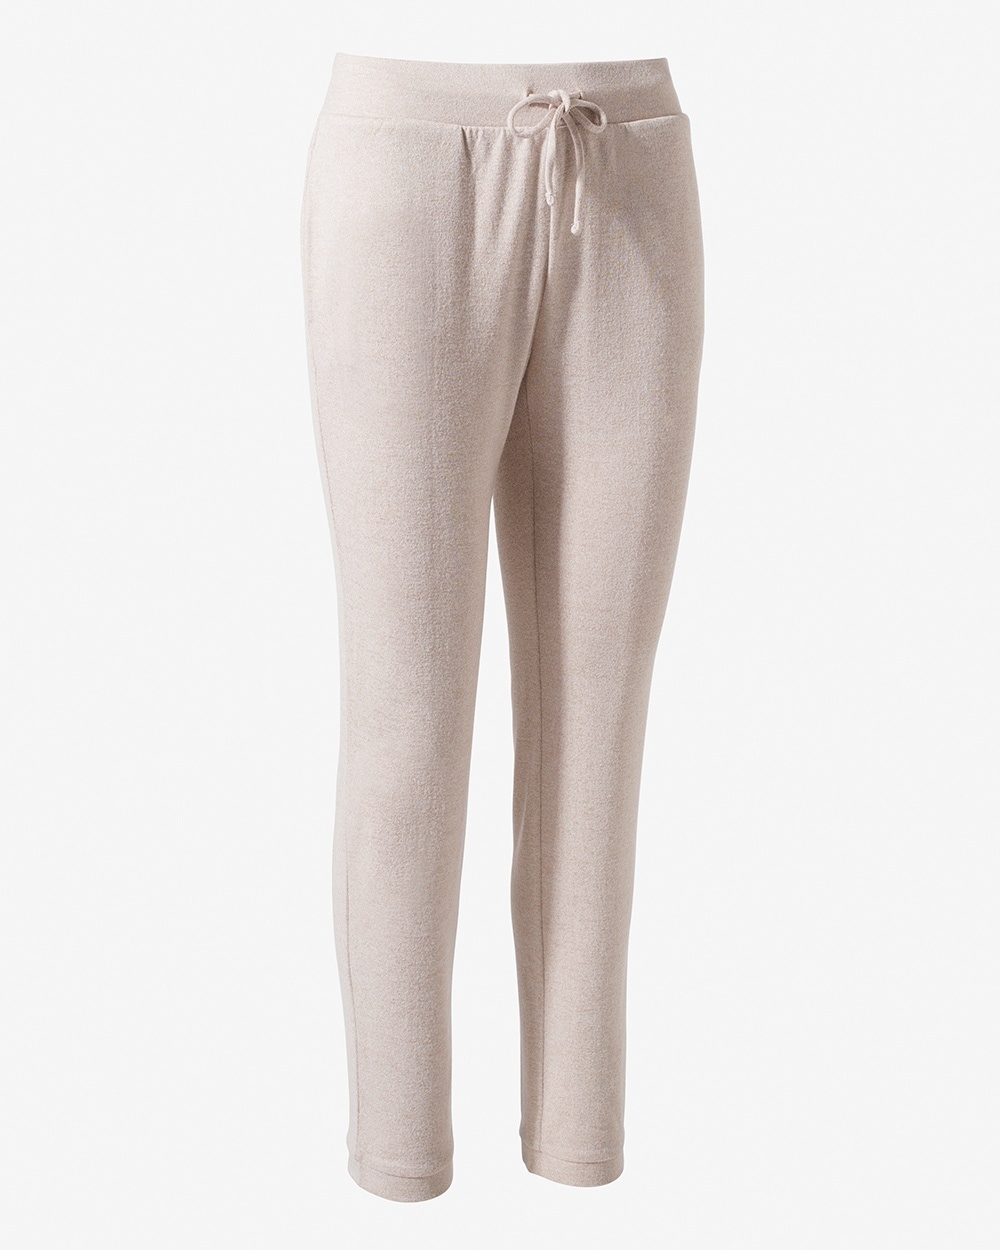 Weekends CoziSoft Easy Drawstring Ankle Pants